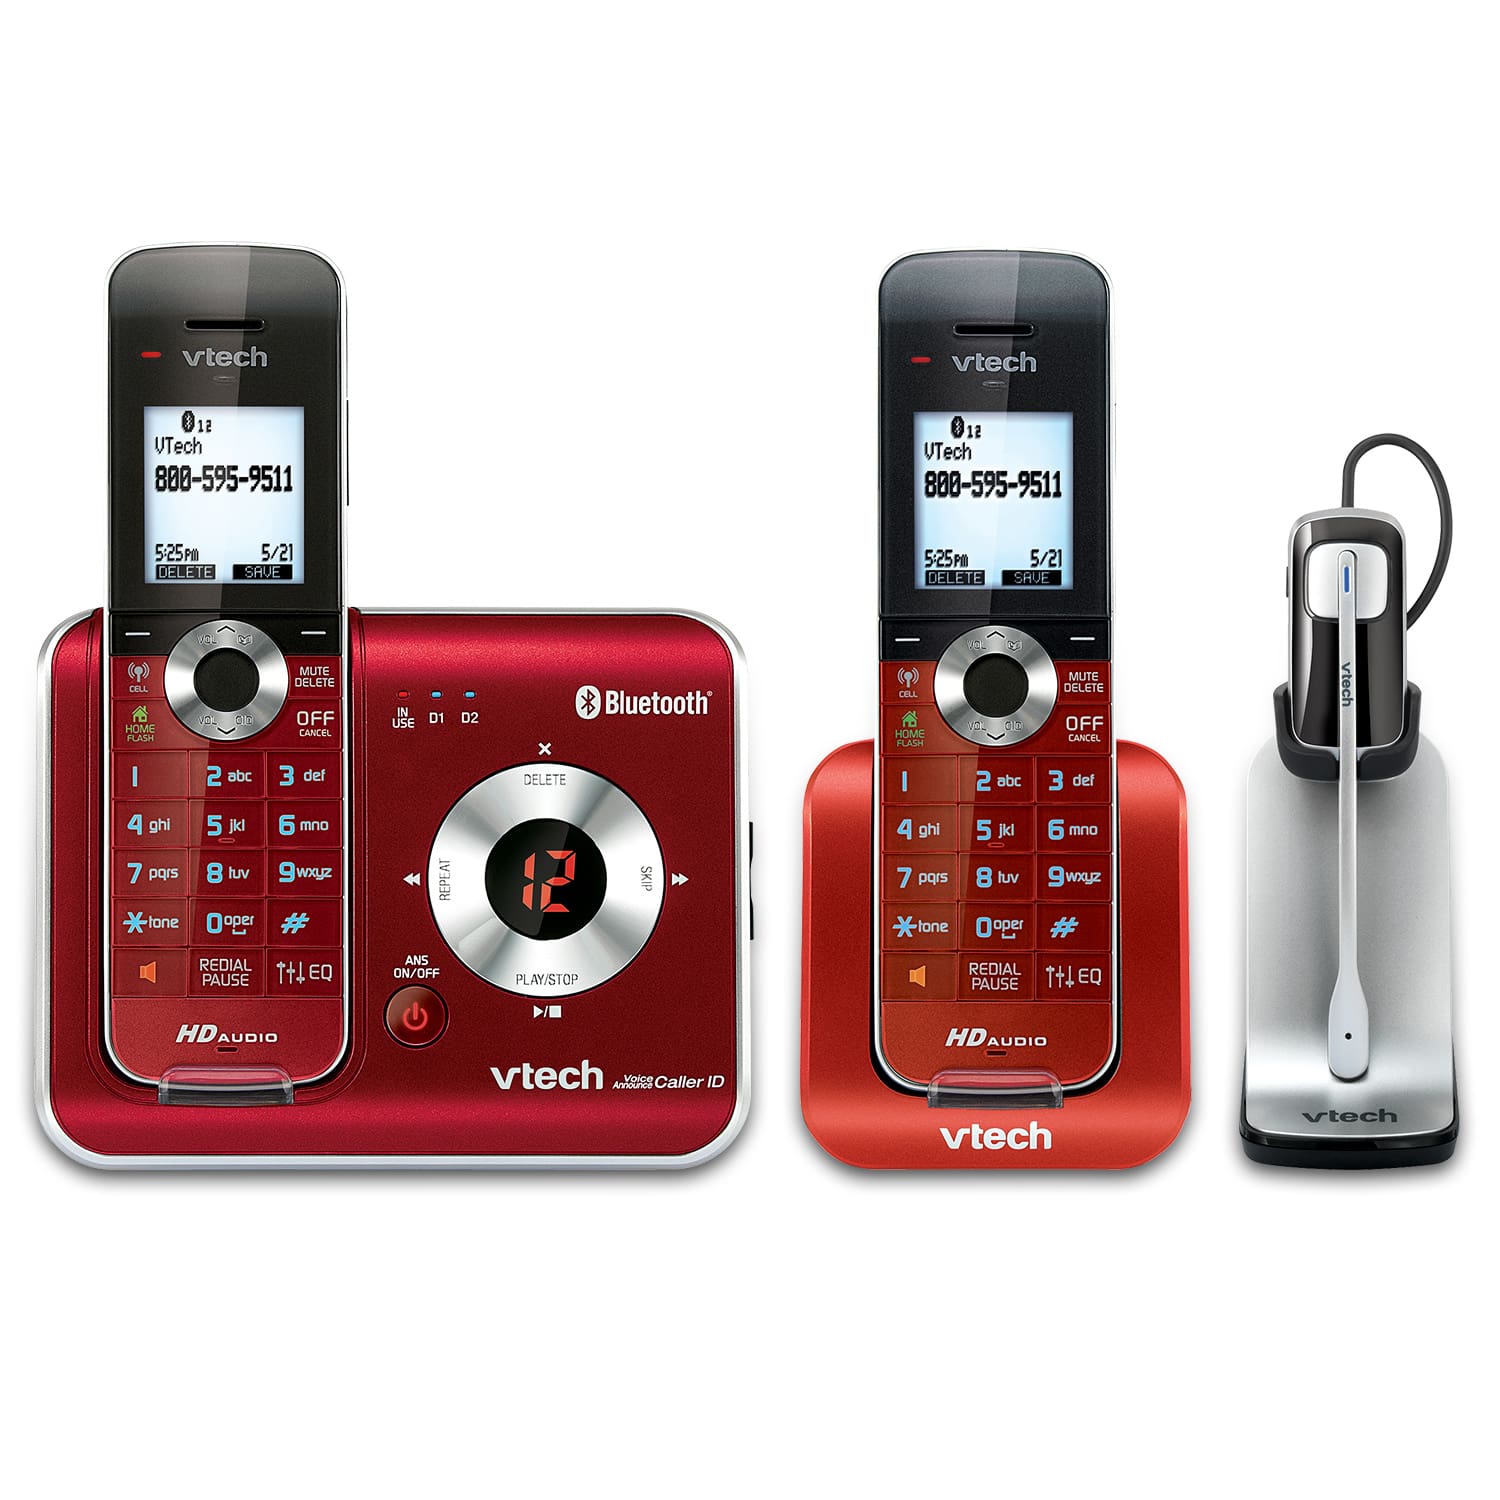 2 Handset Connect to Cell™ Phone System with Cordless Headset